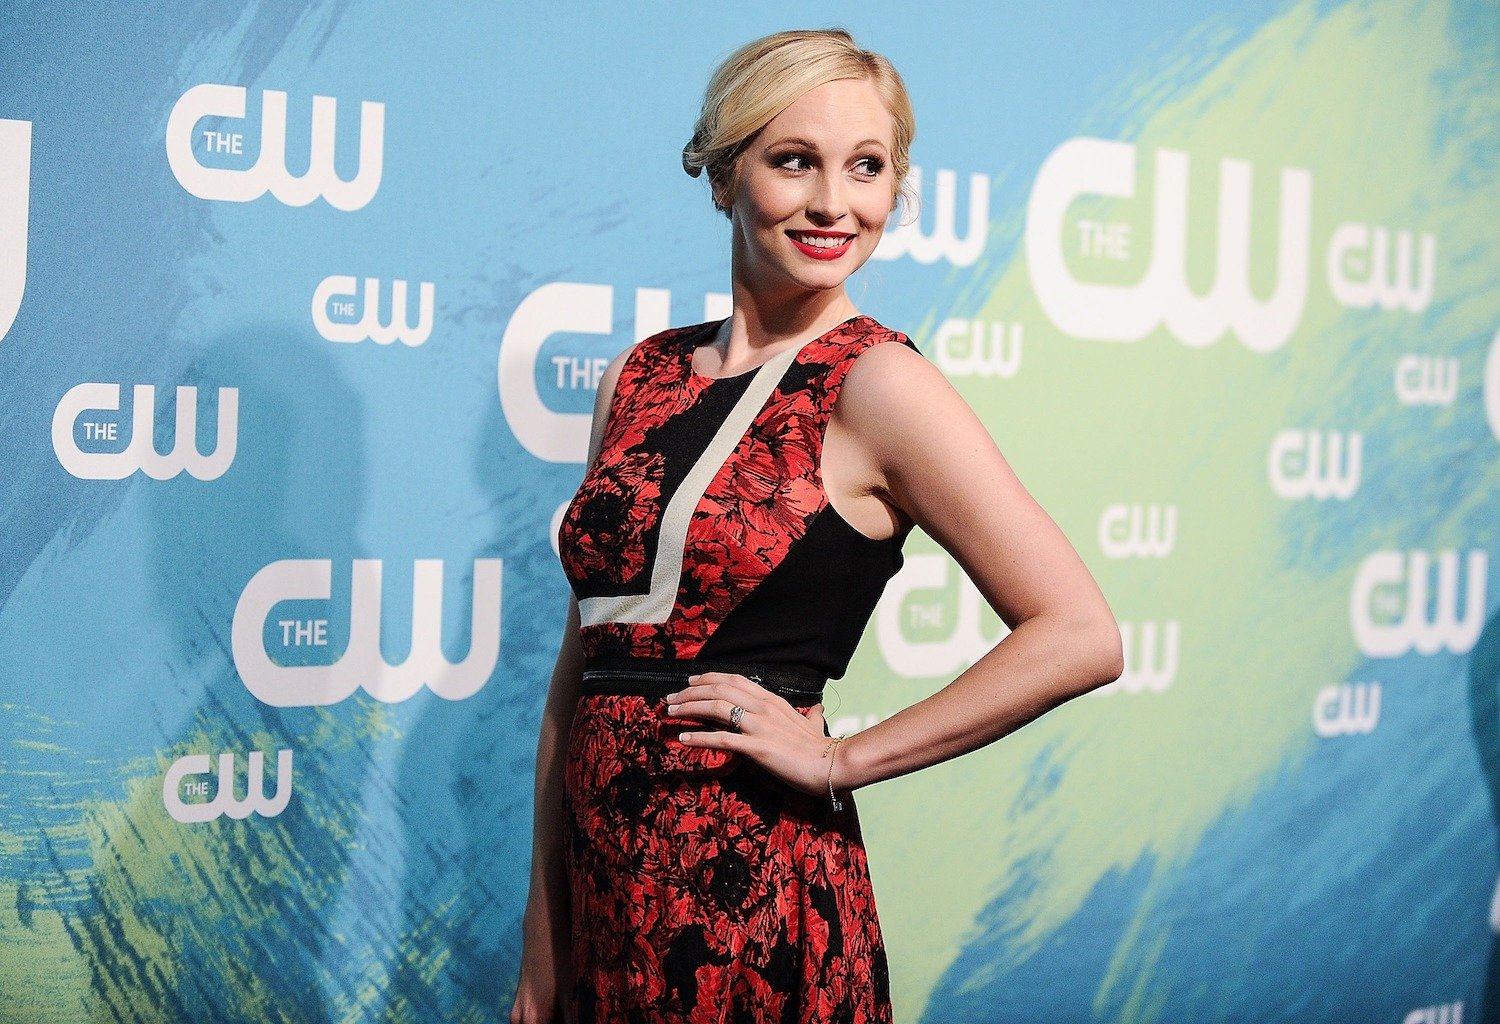 Candice King from 'The Vampire Diaries' posing for a CW event